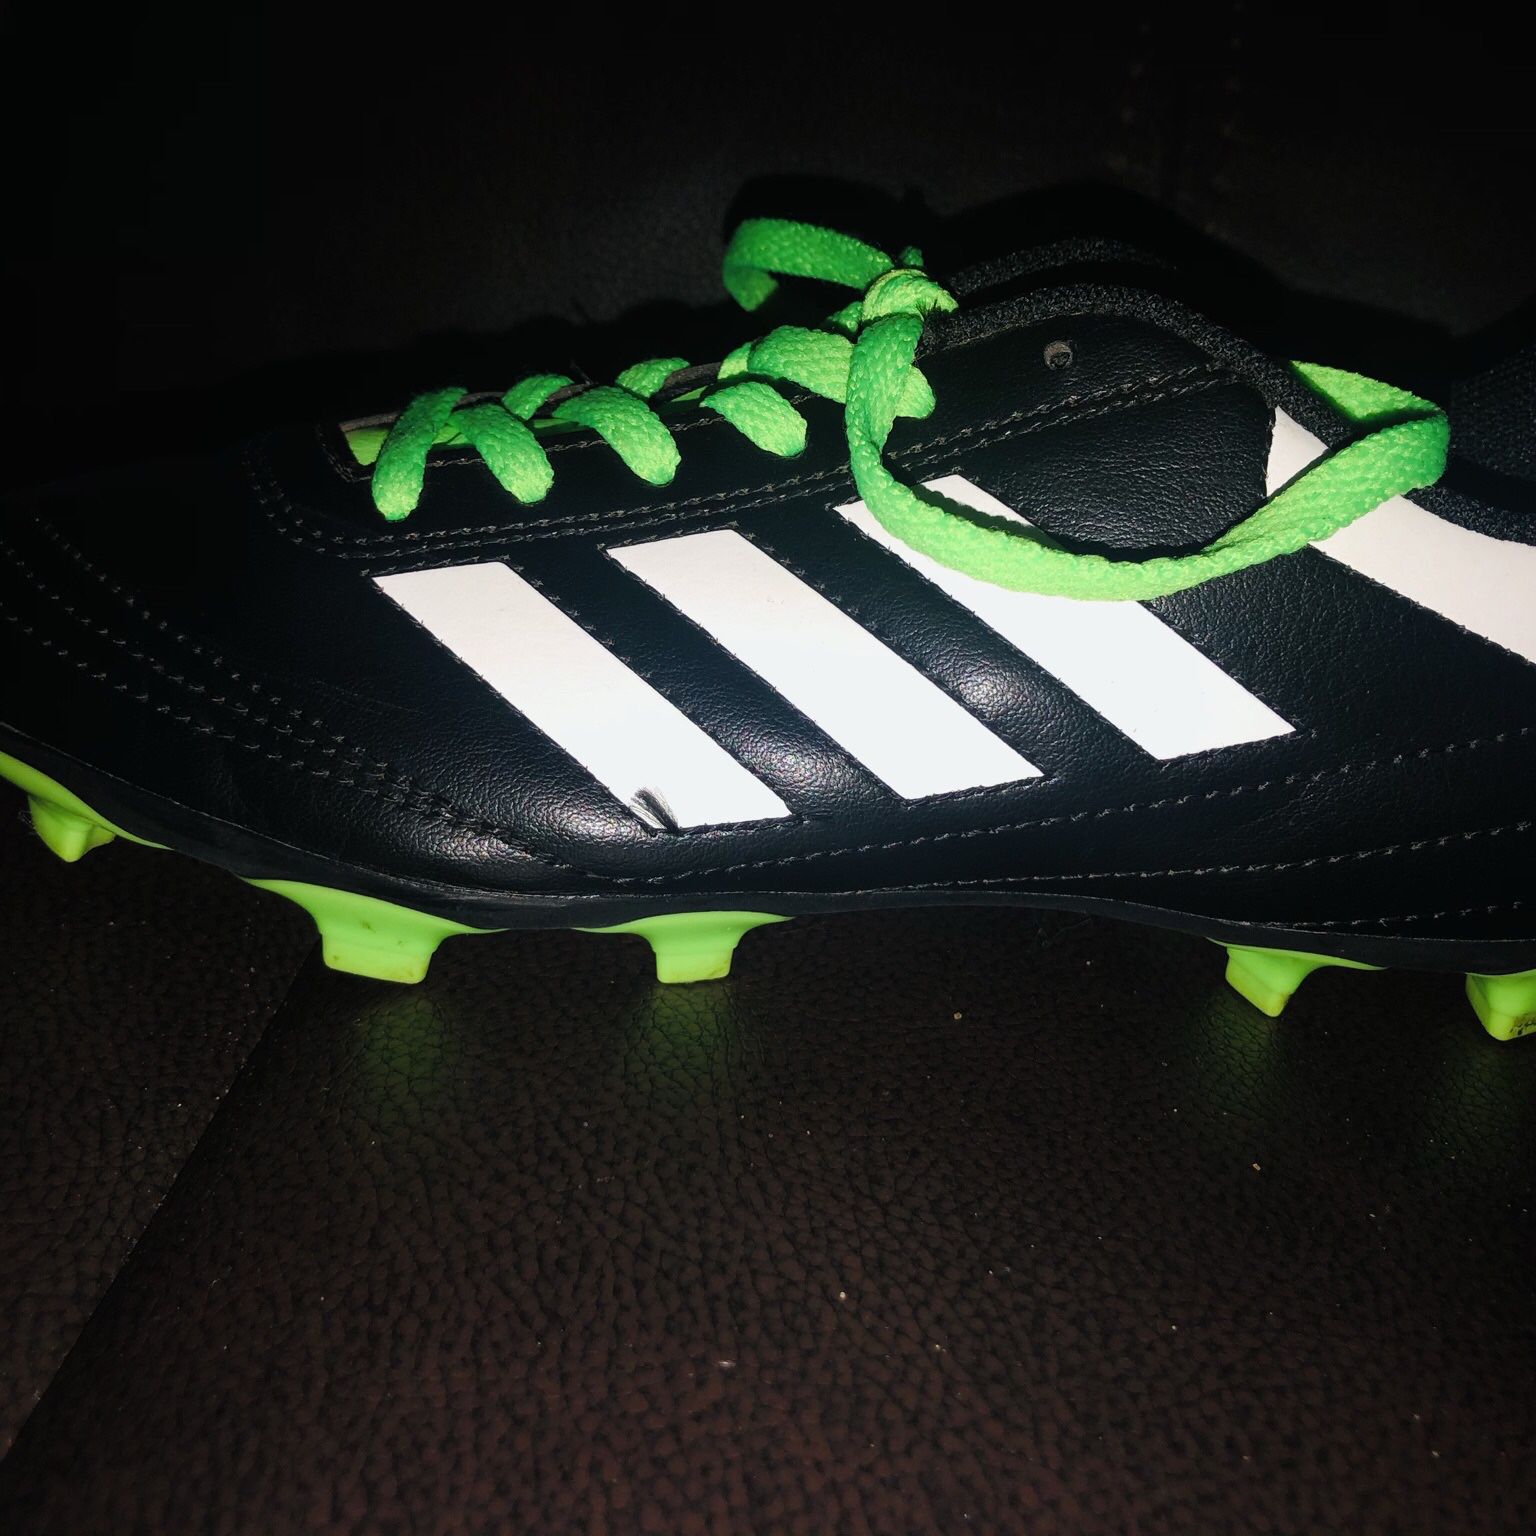 Adidas Soccer shoes And Shin Guards